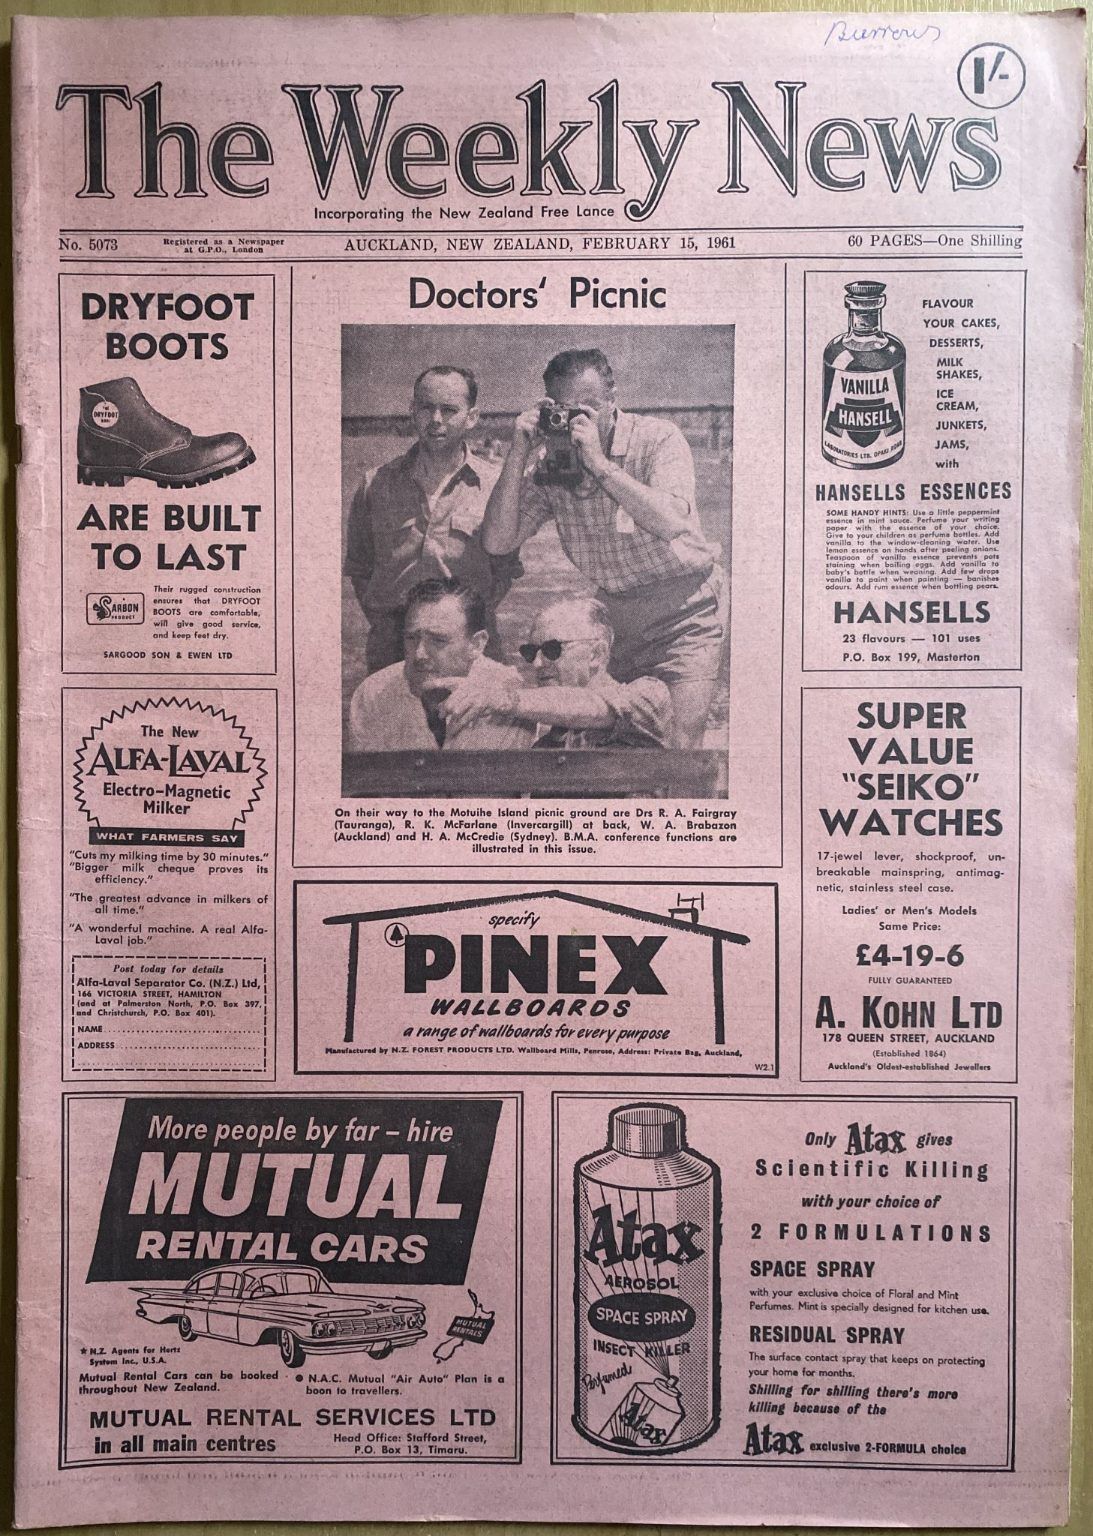 OLD NEWSPAPER: The Weekly News, No. 5073, 15 February 1961